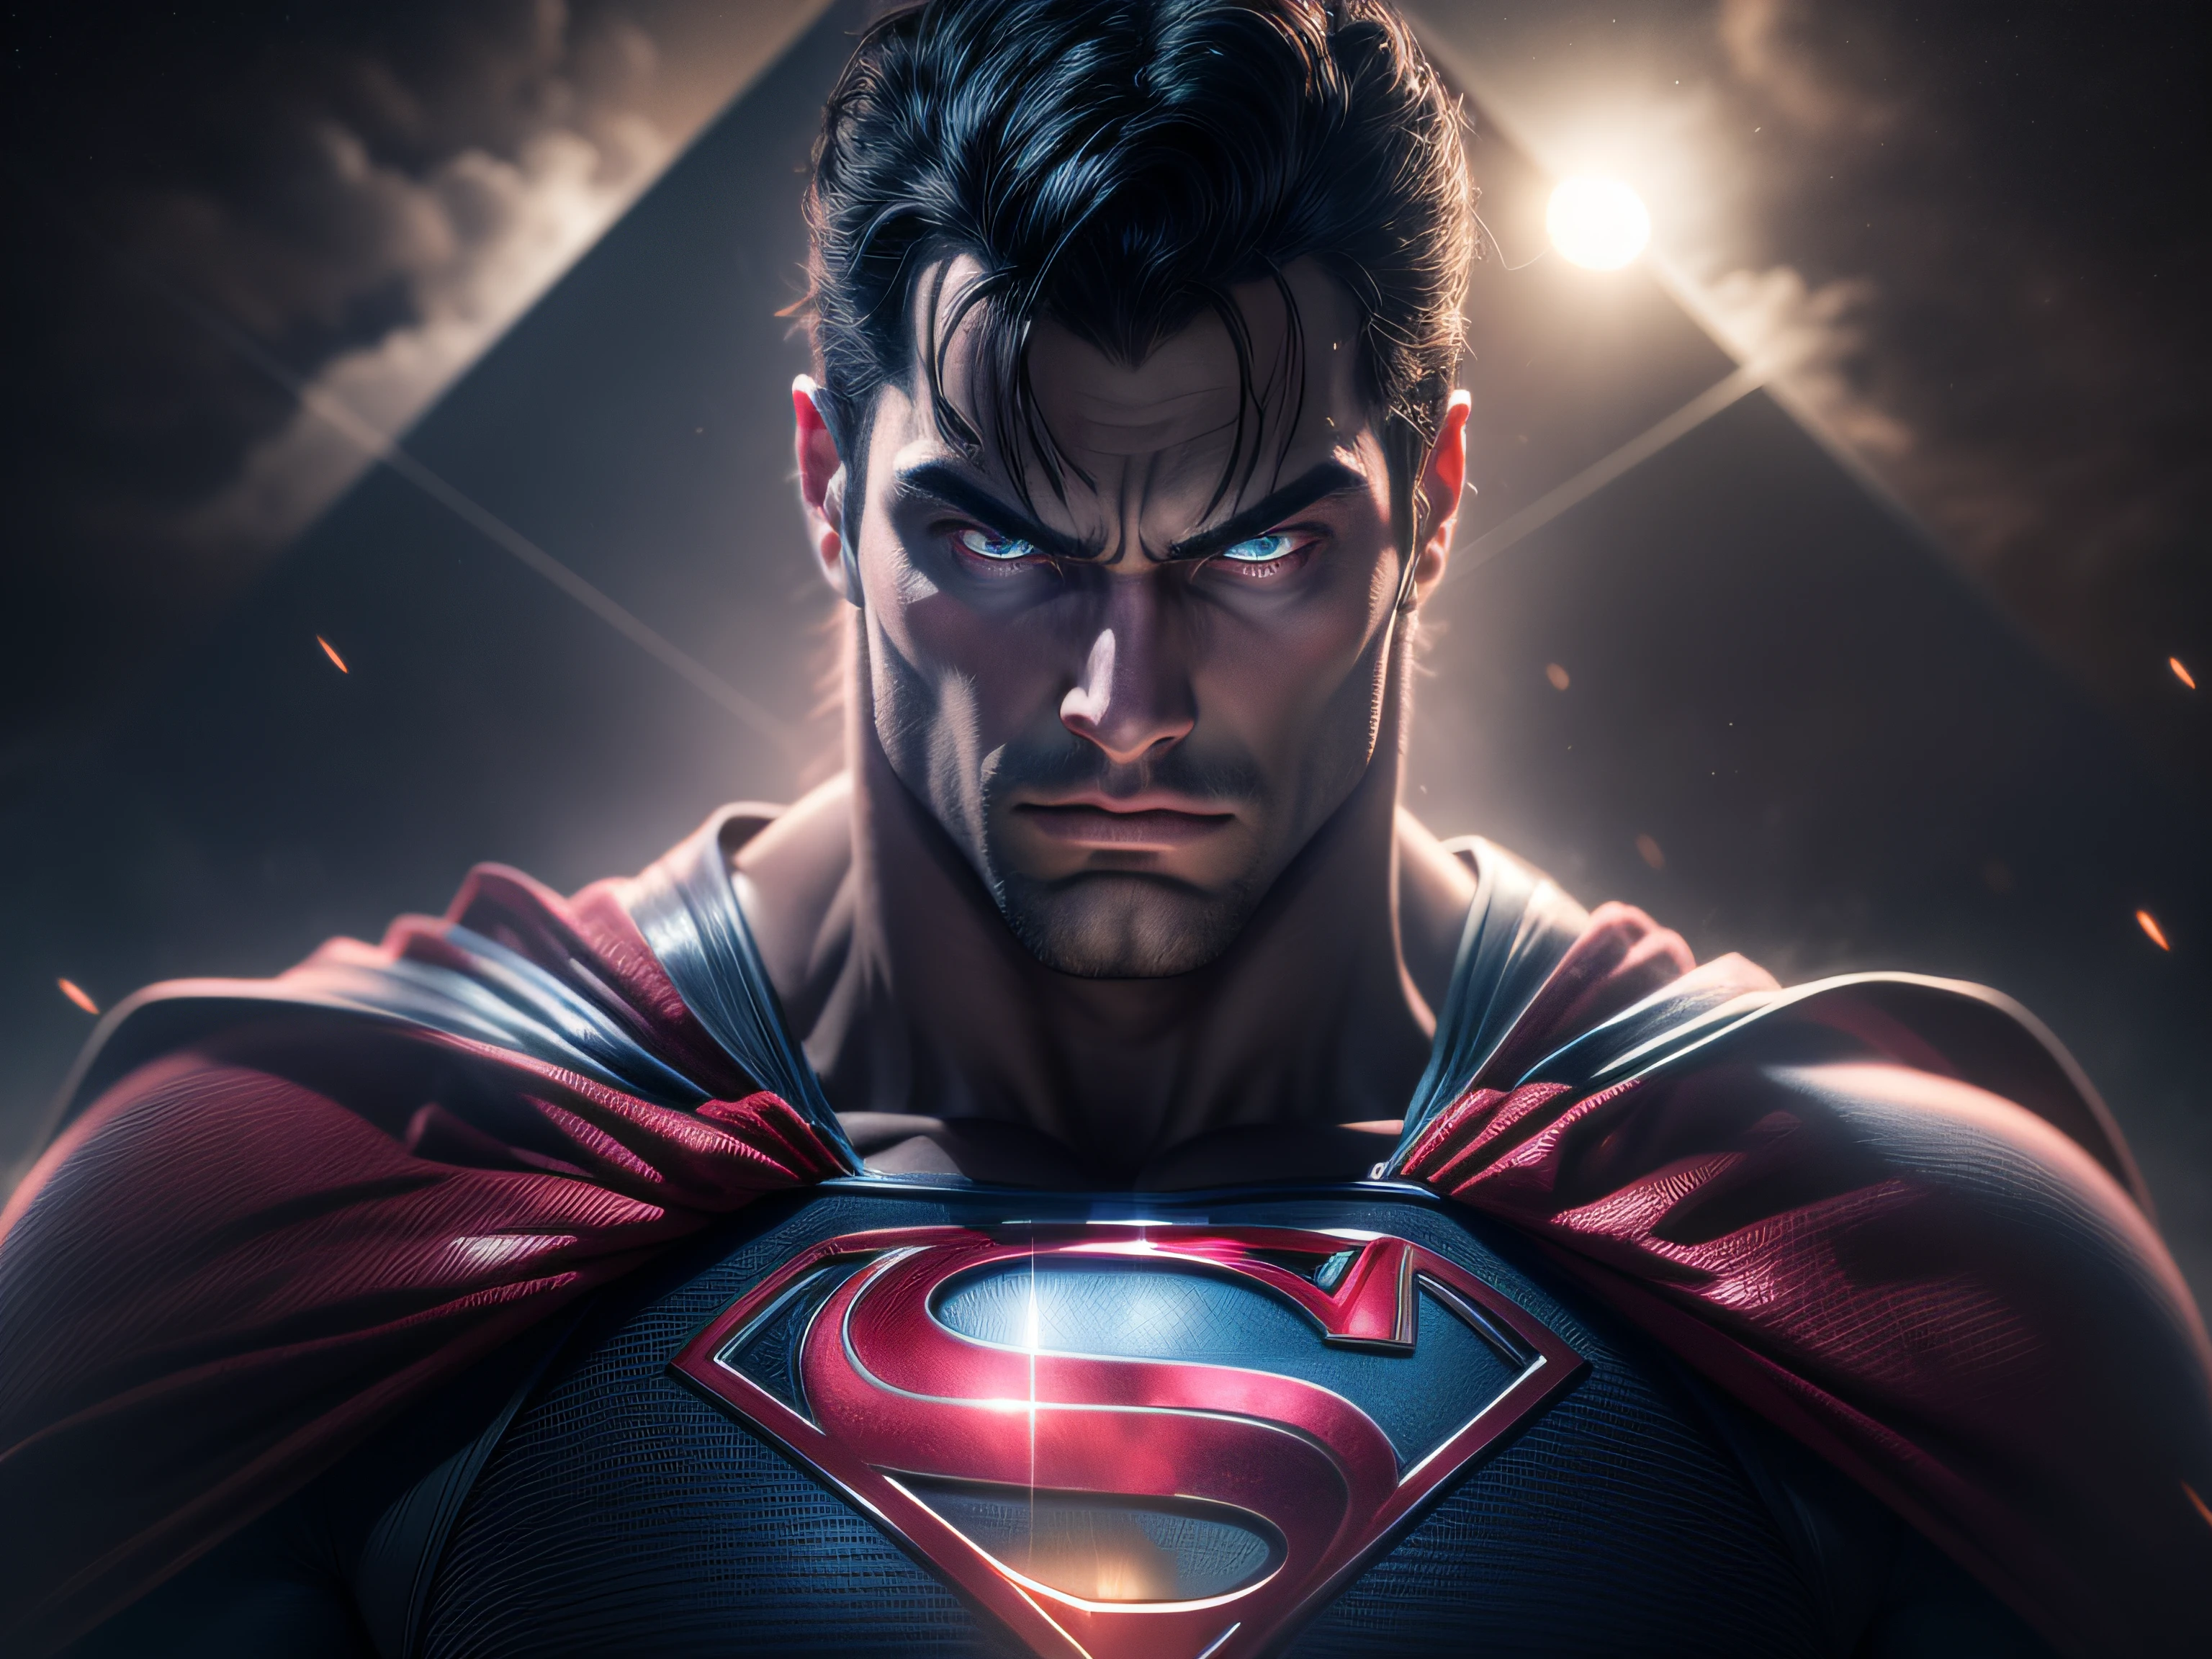 Close a powerful threat, The imposing appearance of the powerful Superman dressed in mirrored uniform that reflects the scenery, menacing stare, ricamente detalhado, Hiper realista, 3D-rendering, obra-prima, NVIDIA, RTX, ray-traced, Bokeh, Night sky with a huge and beautiful full moon, estrelas brilhando, 8k,